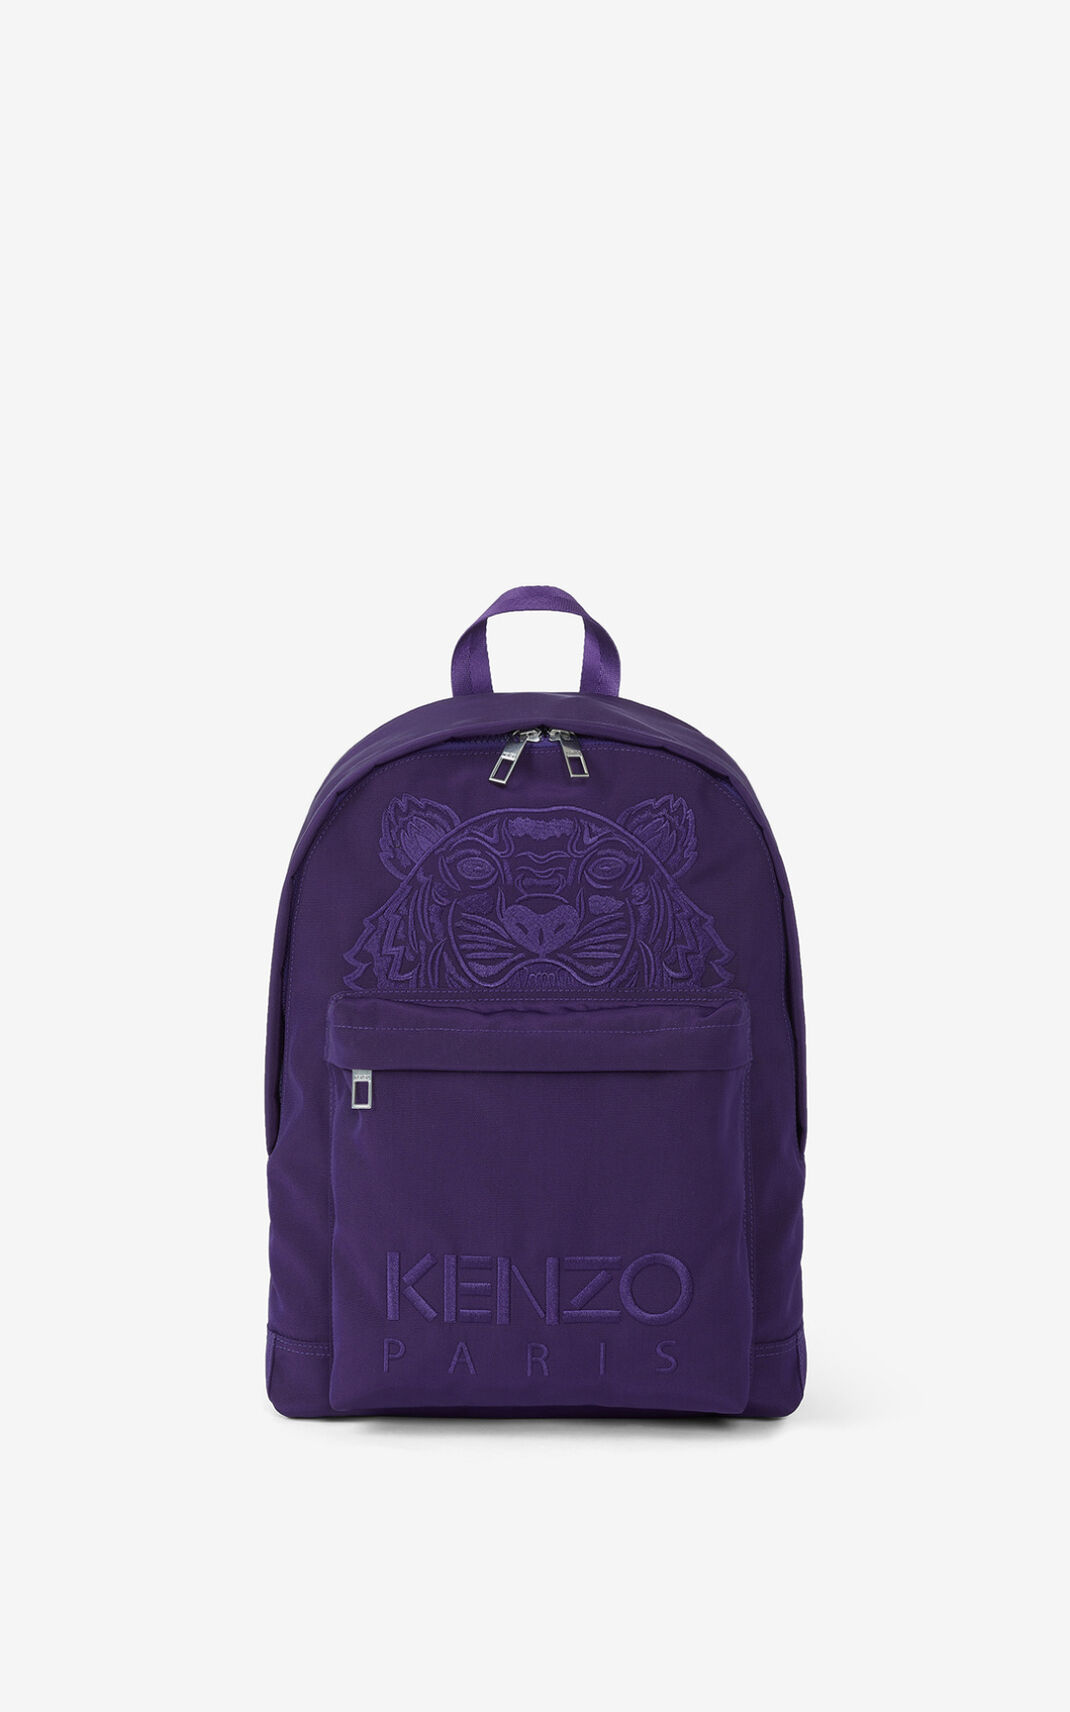 Kenzo Canvas Kampus Tiger Backpack Purple For Mens 3851OGMHD